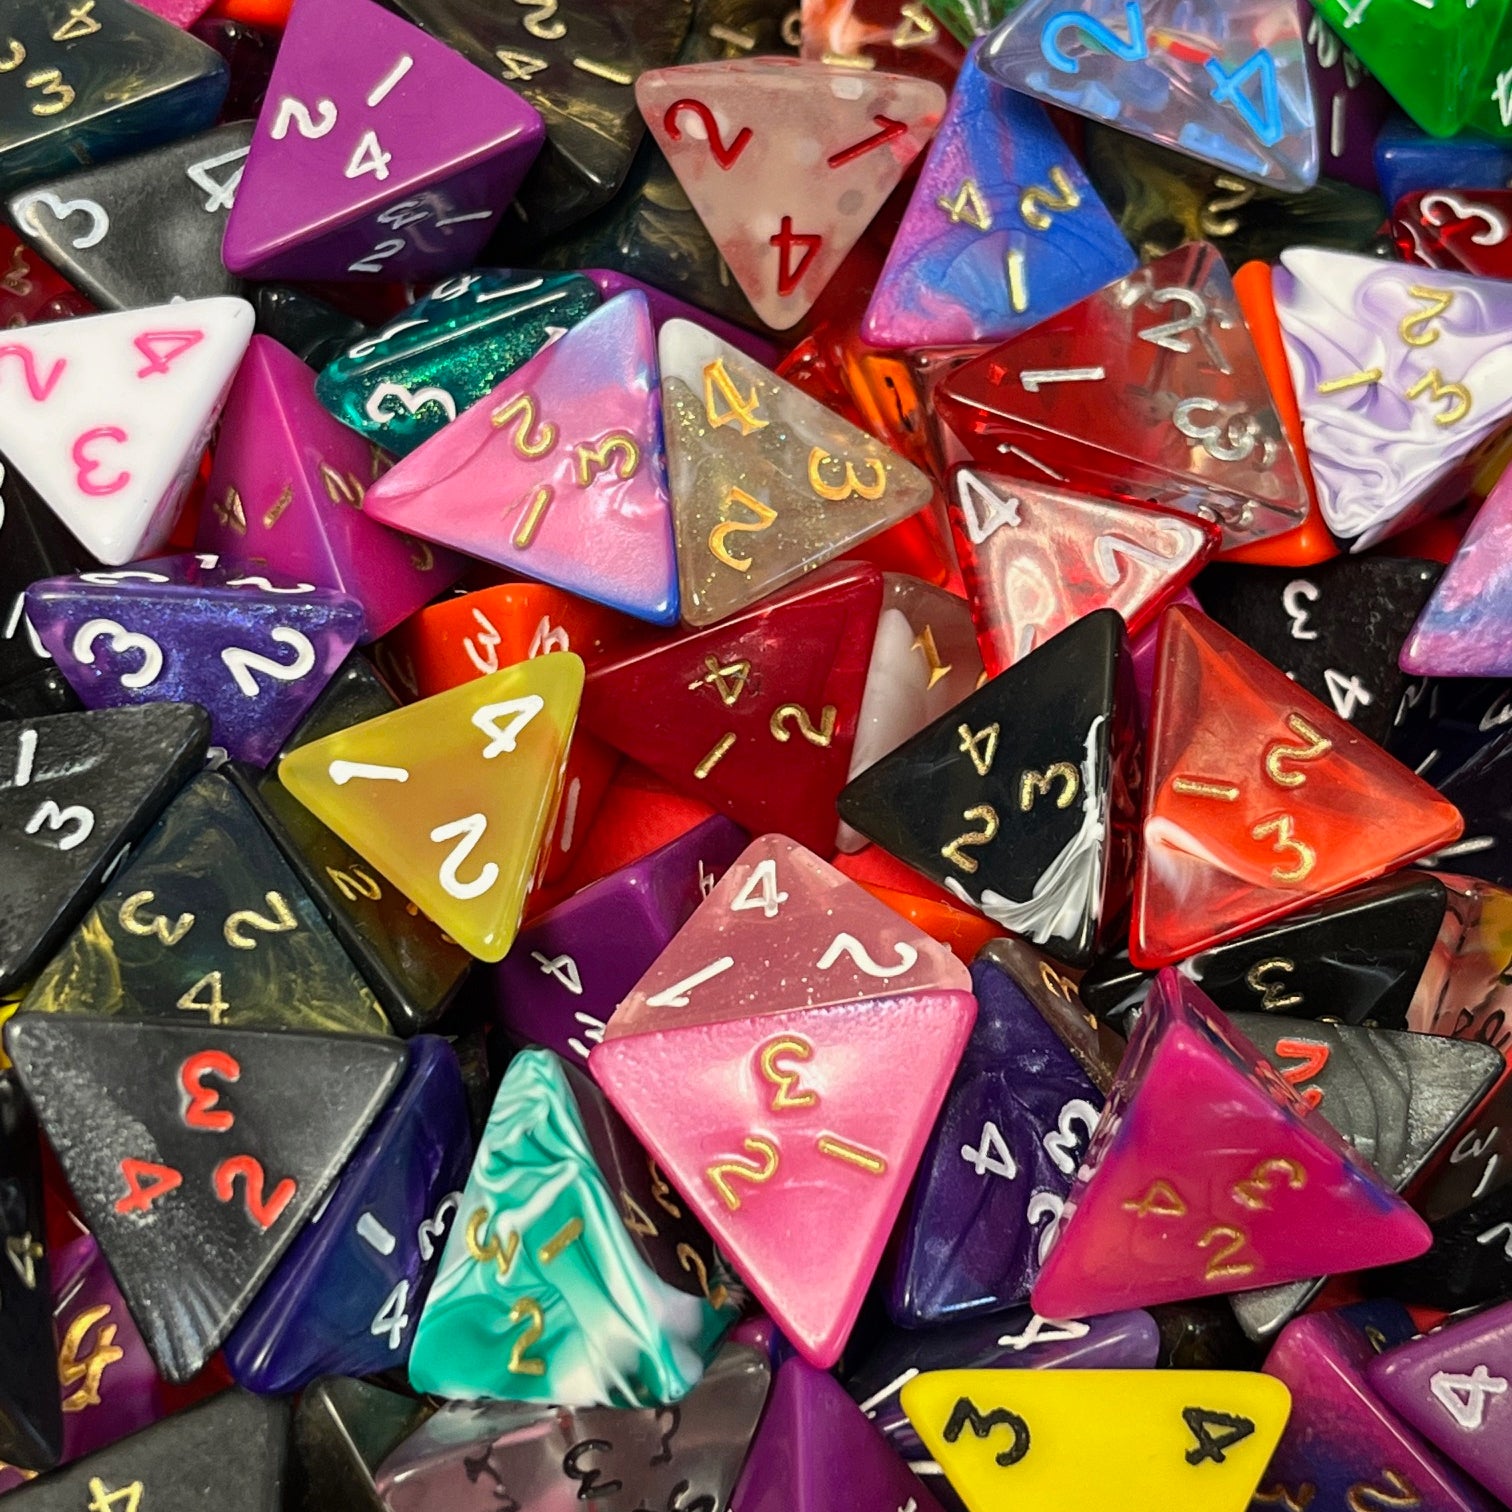 Random D4 TTRPG dice sets for DND and role playing games and dice goblin collectors